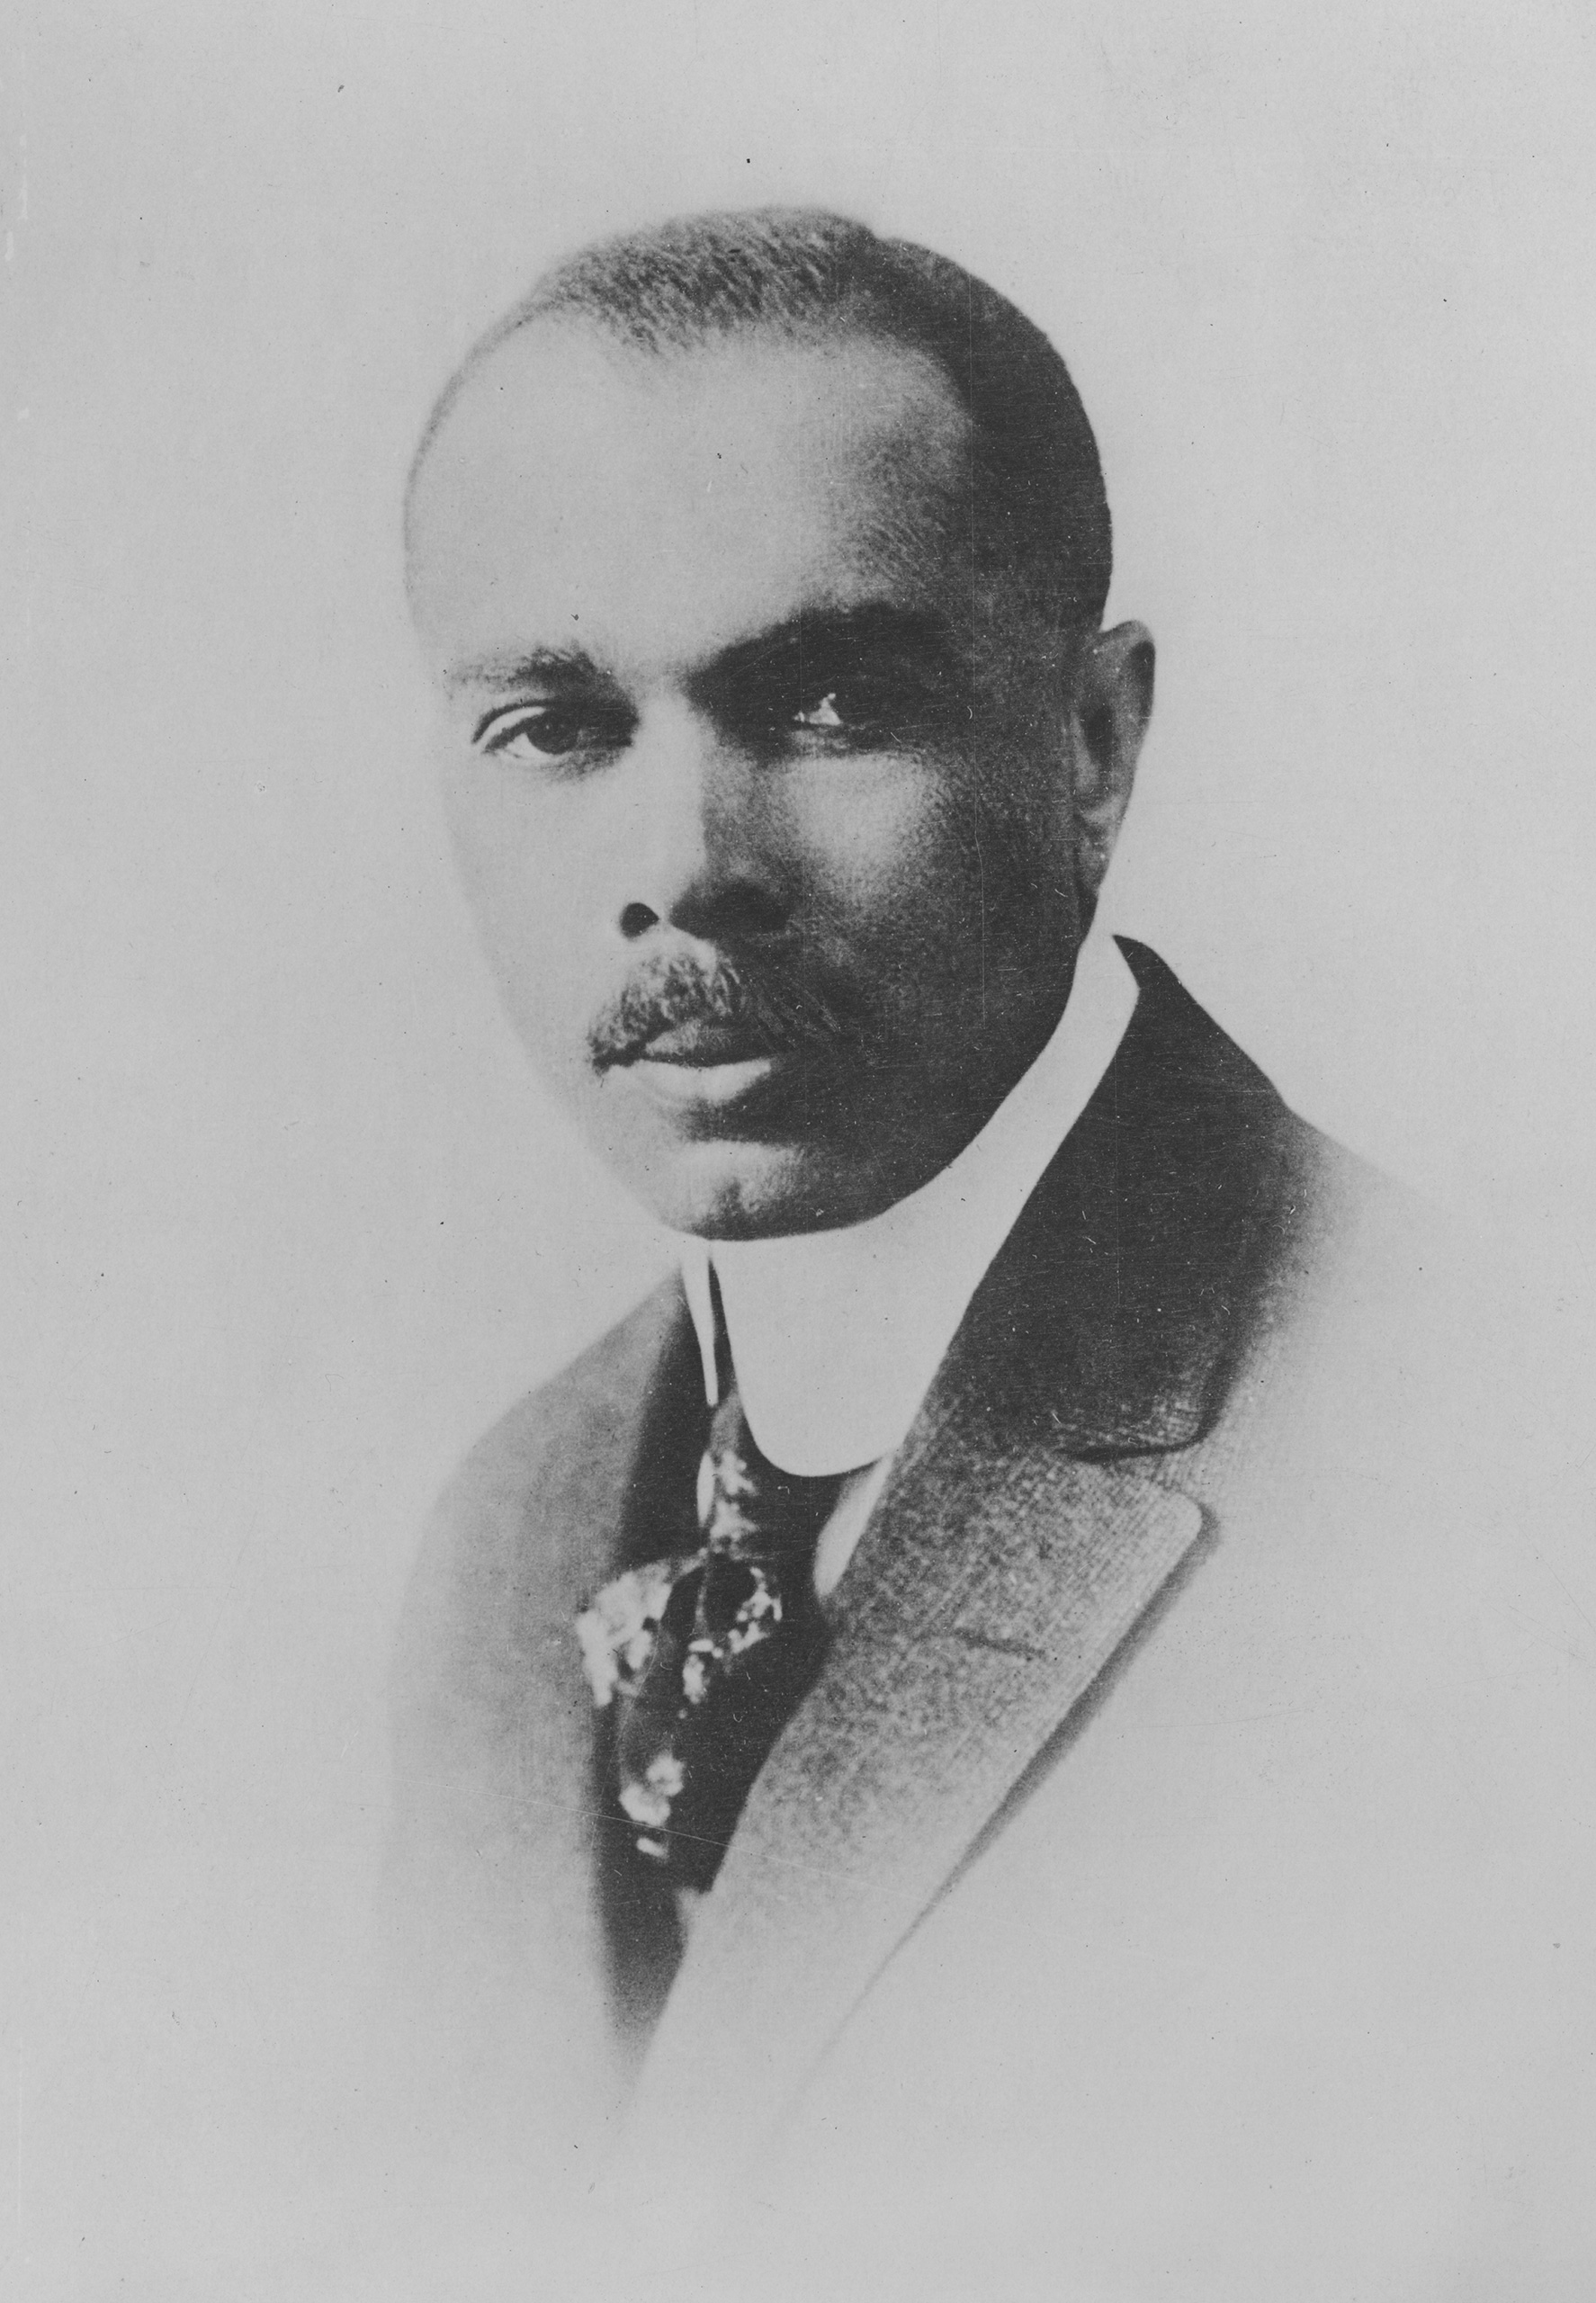 A portrait of American author, politician, diplomat, critic, journalist, poet, anthologist, educator, lawyer, songwriter, and early civil rights activist James Weldon Johnson, circa 1925. (FPG—Getty Images)